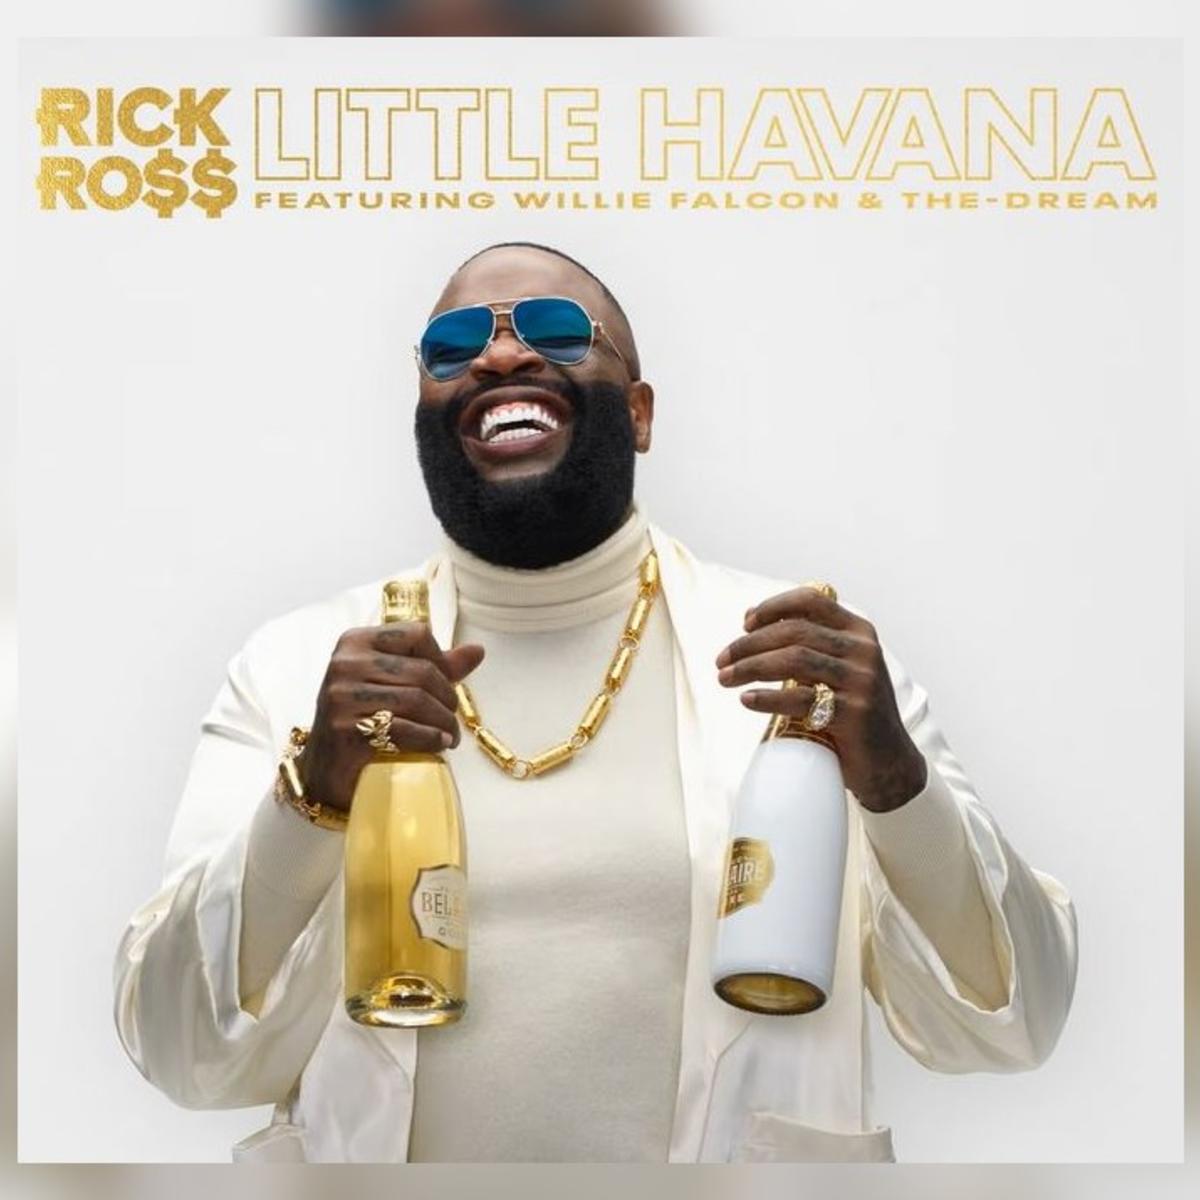 Rick Ross Drops “Little Havana” With The-Dream & Willie Falcon